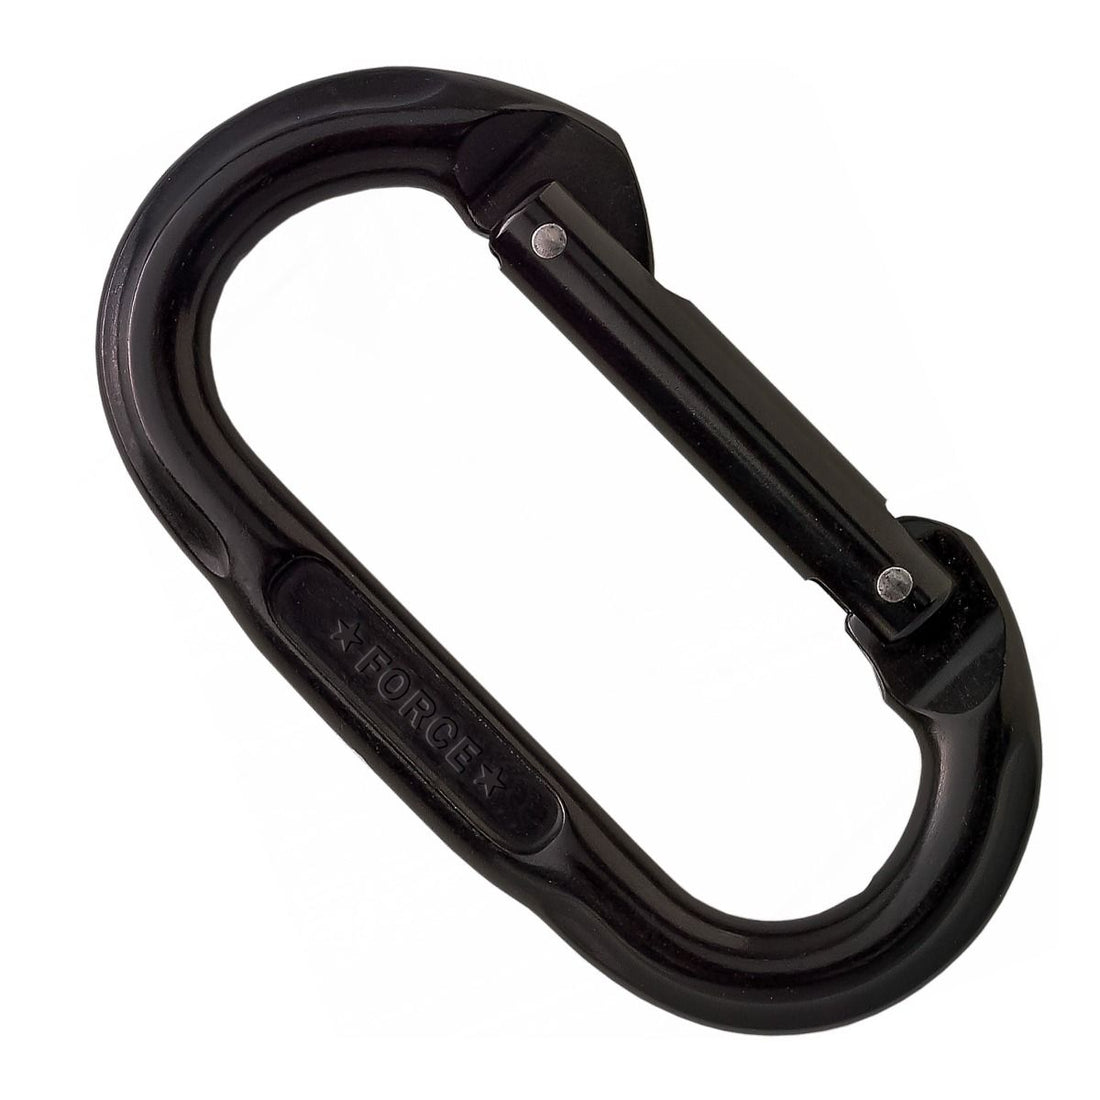 Supplies - Outdoor - Carabiners - SMC FORCE Non-Locking Oval Carabiner